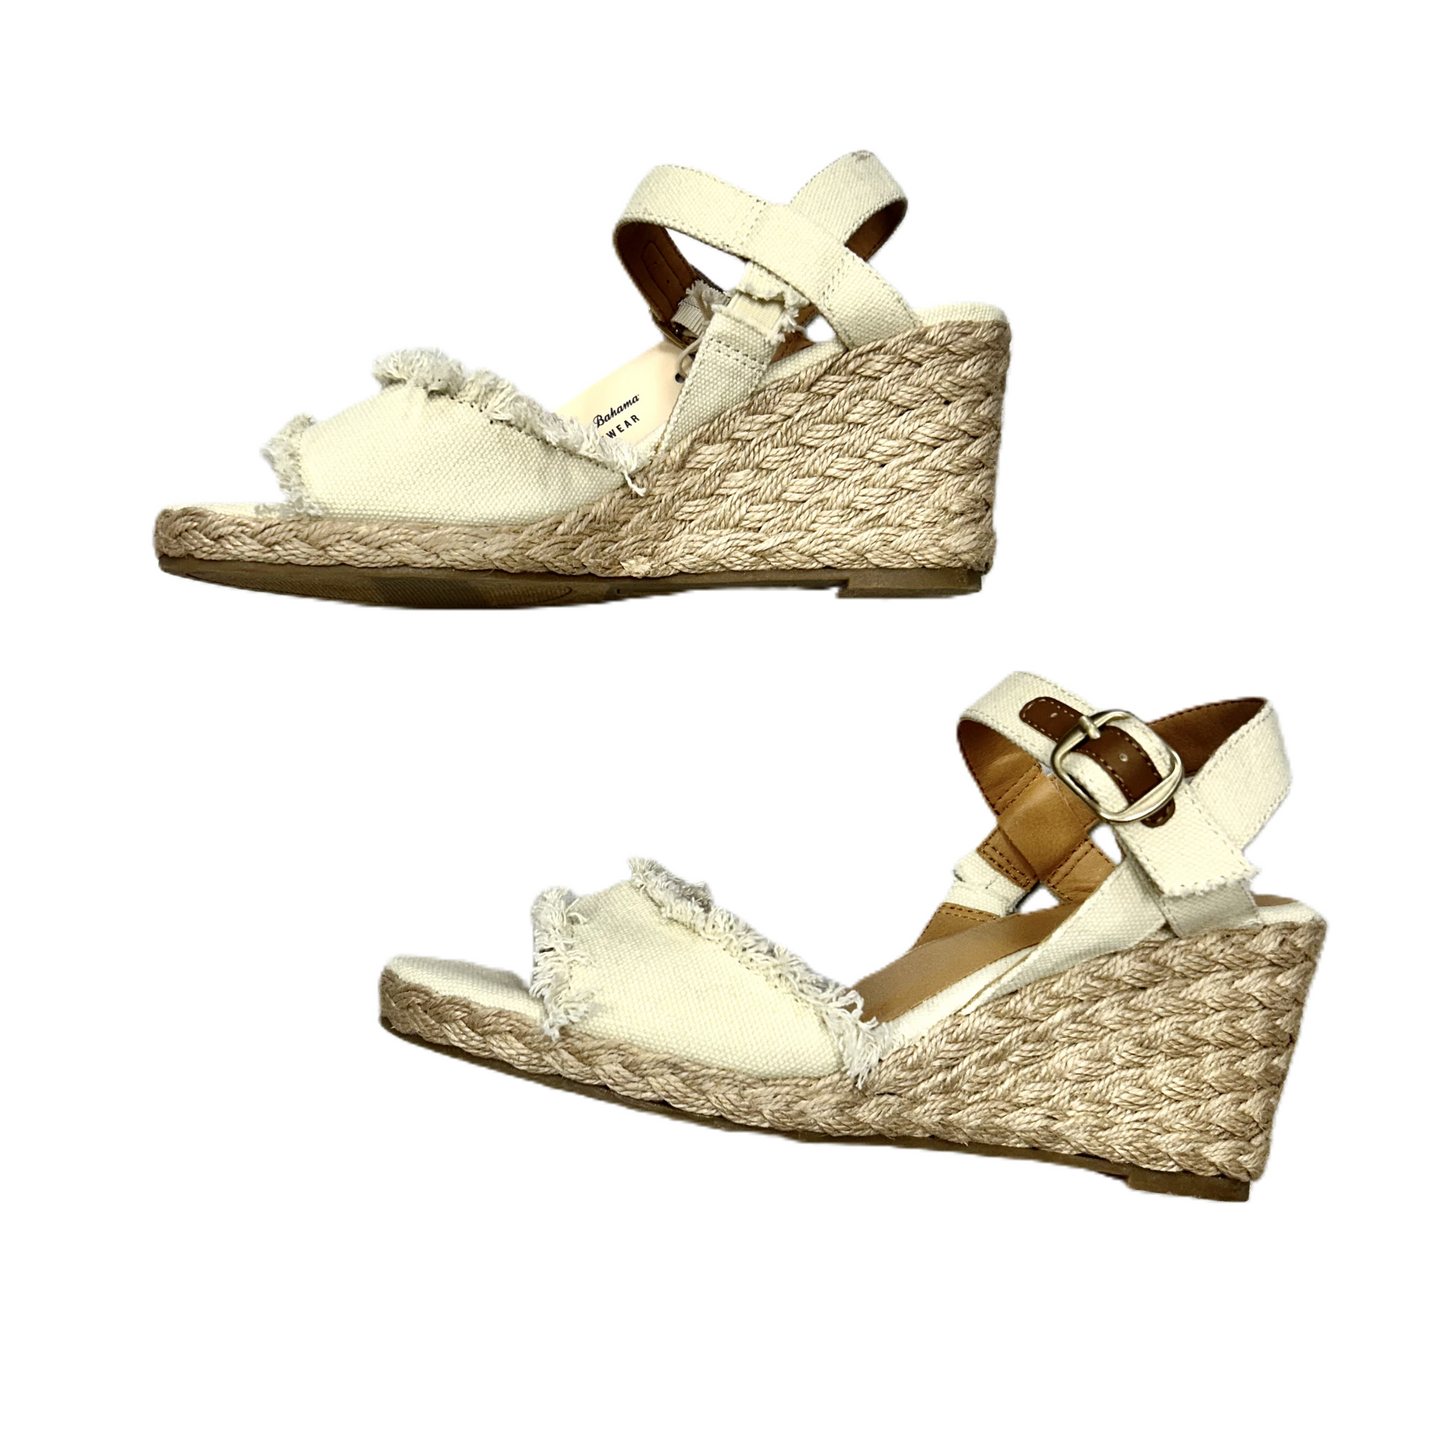 Sandals Heels Wedge By Tommy Bahama, Size: 8